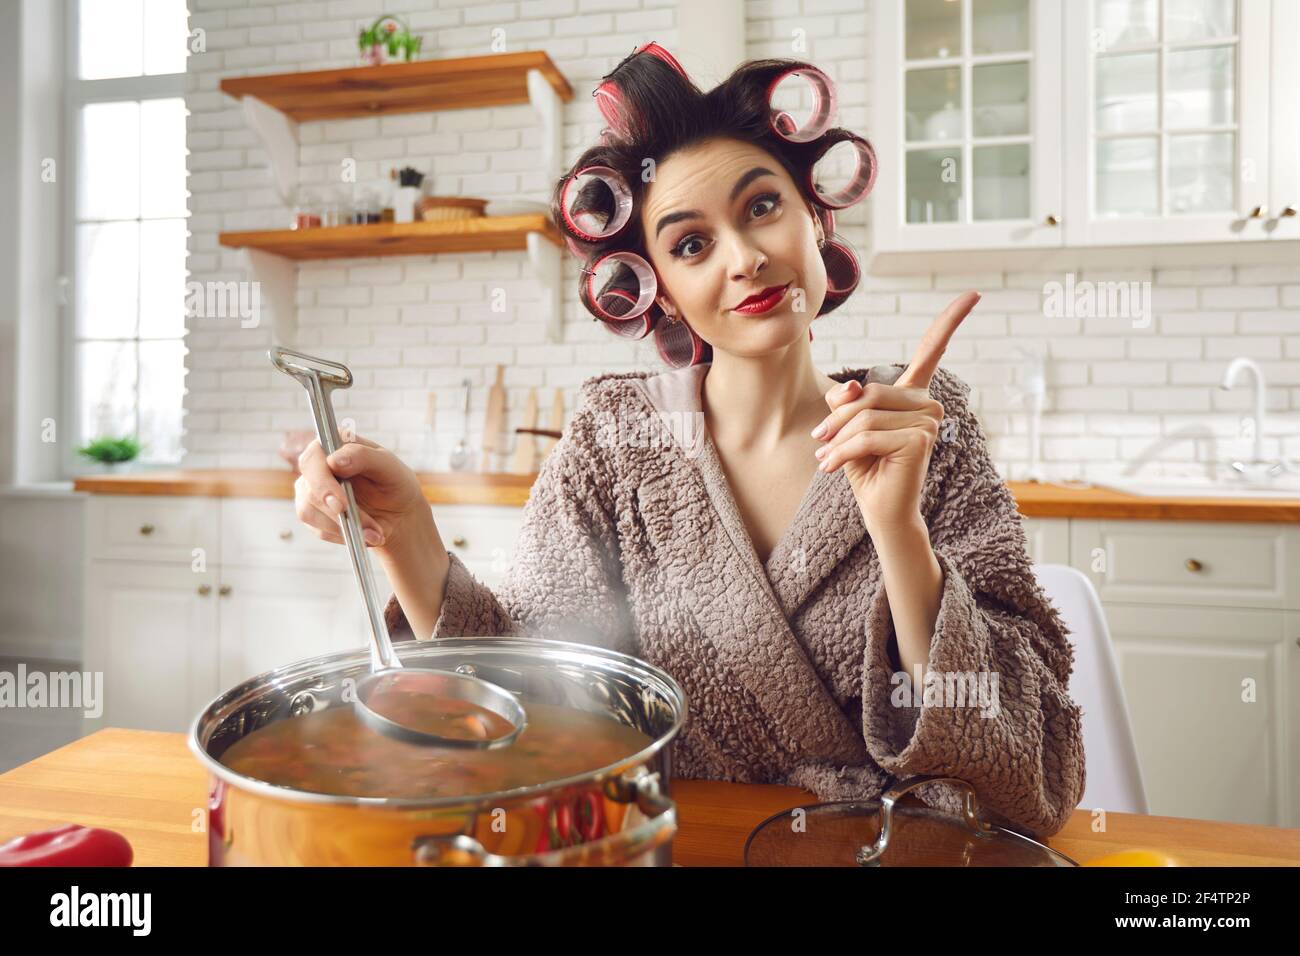 Young funny attractive housewife in curlers and bathrobe cooking at home kitchen Stock Photo